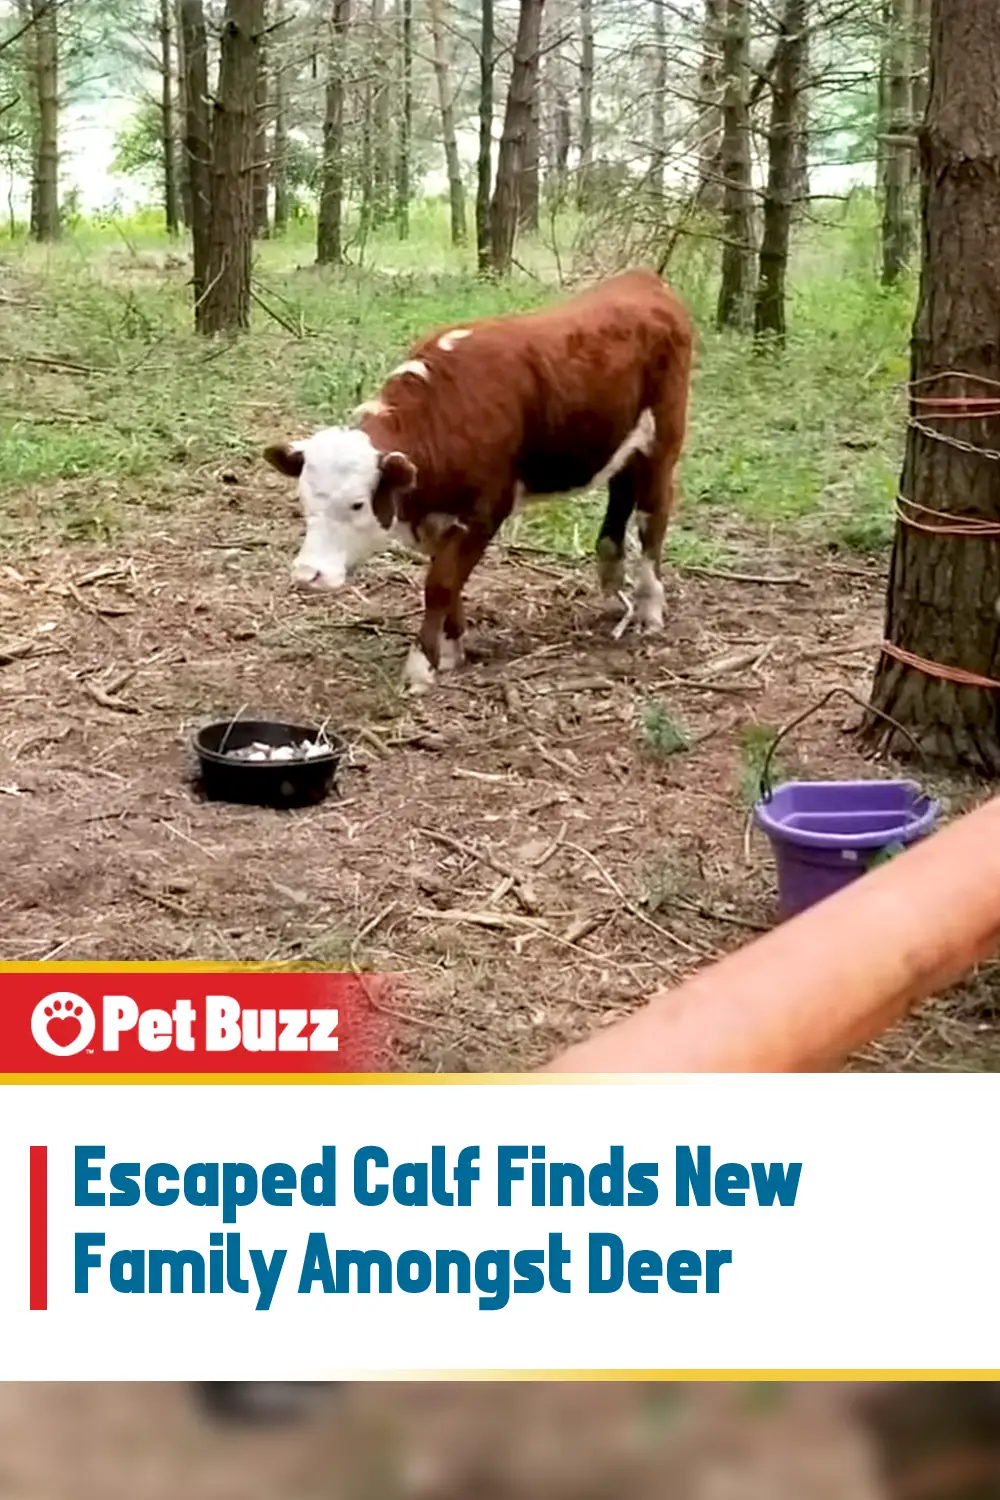 Escaped Calf Finds New Family Amongst Deer